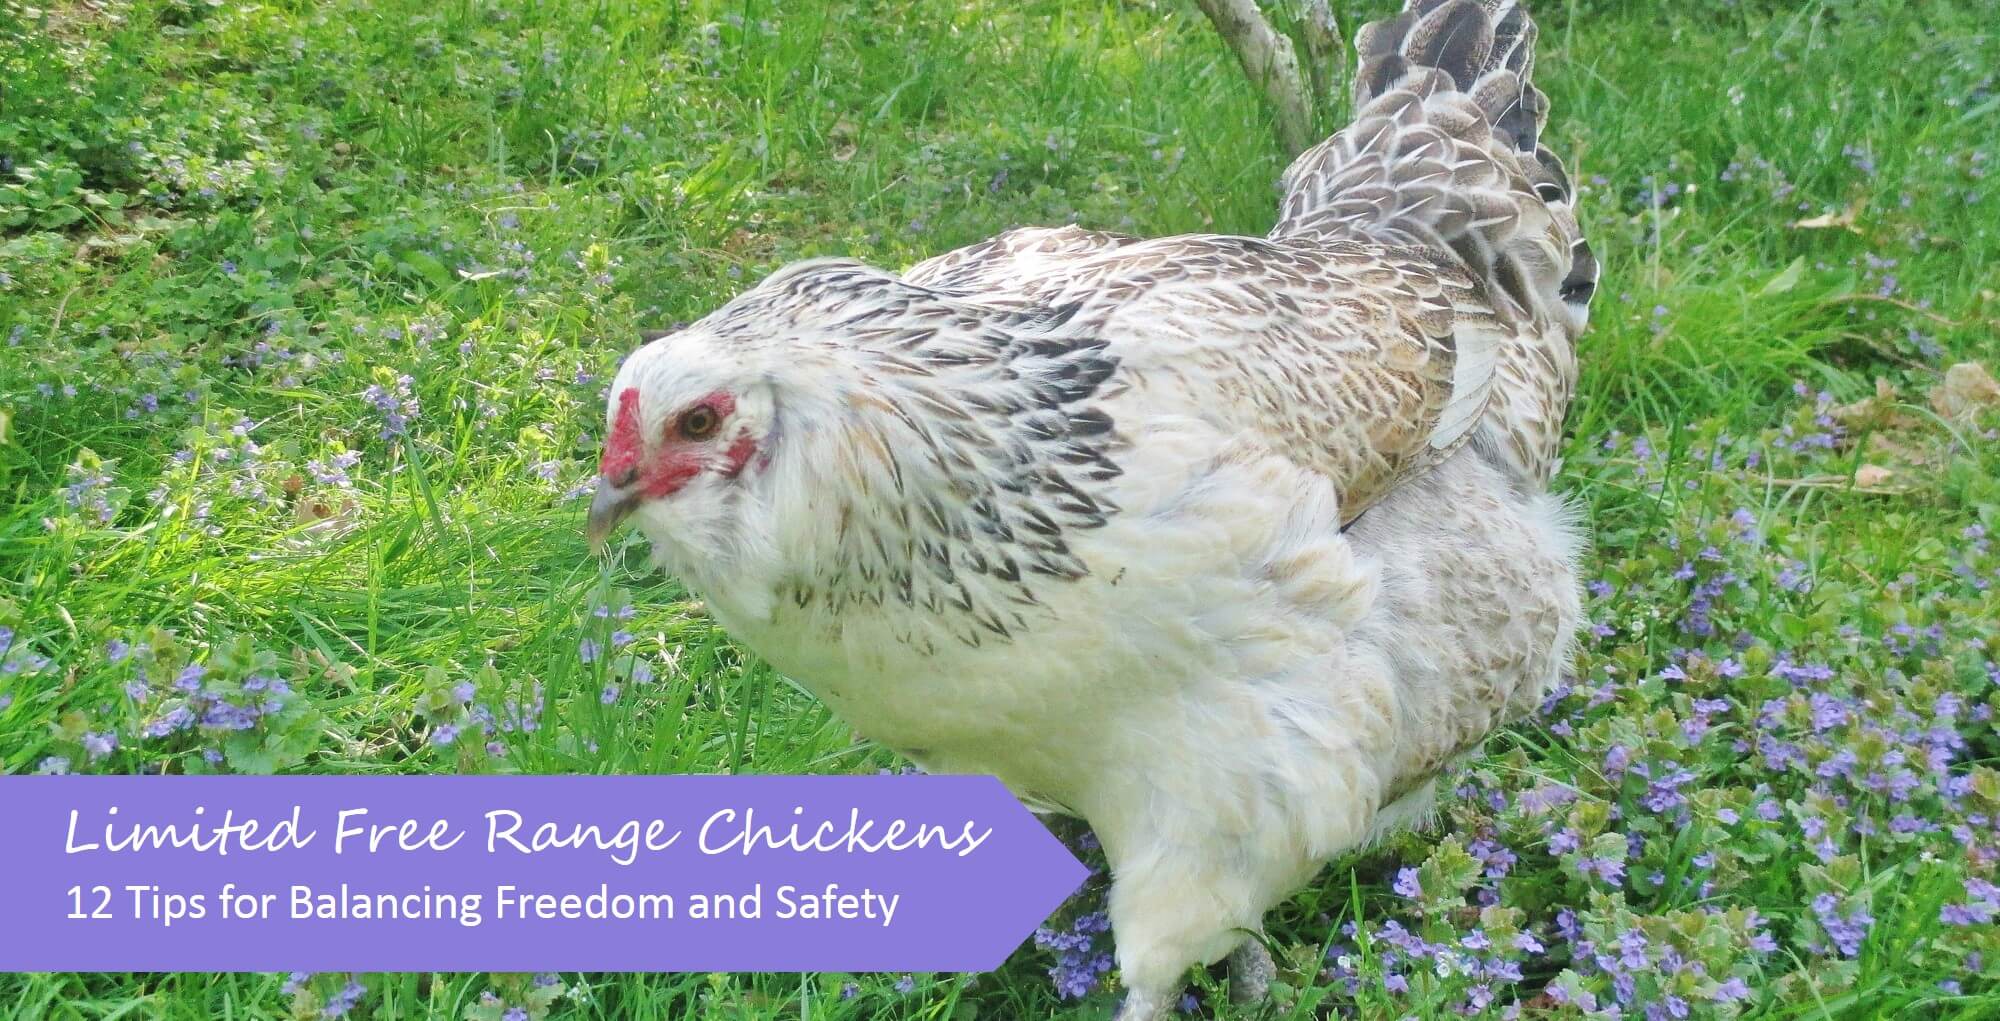 Limited Free Range Chickens 12 Tips To Balance Freedom Safety